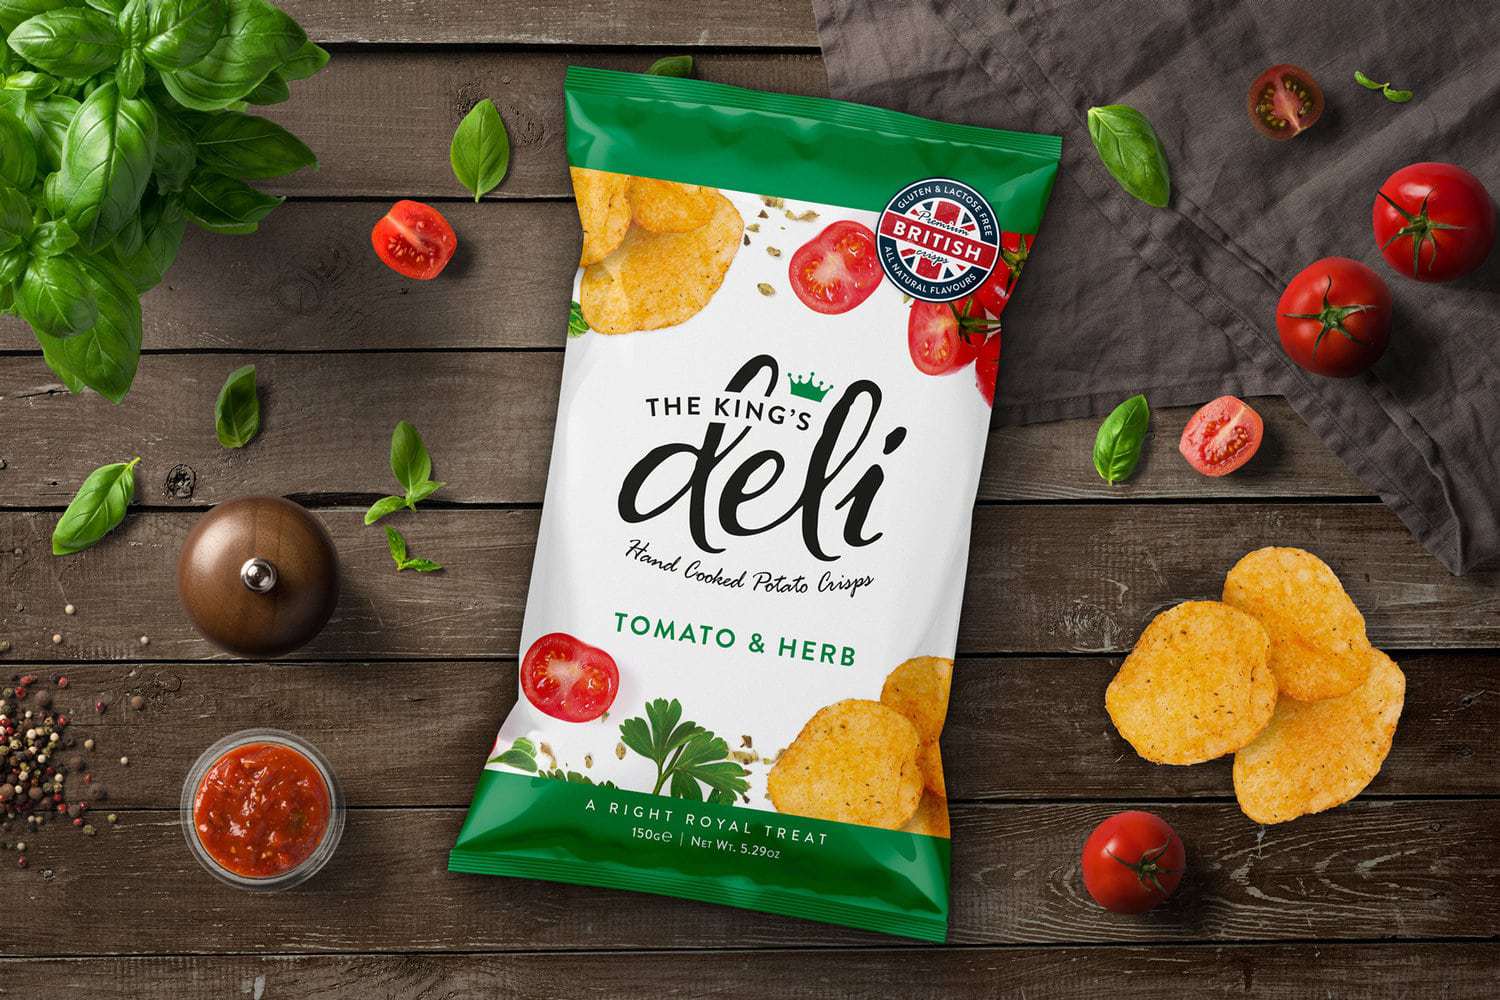 Brand and Packaging Design for The King’s Deli Crisps